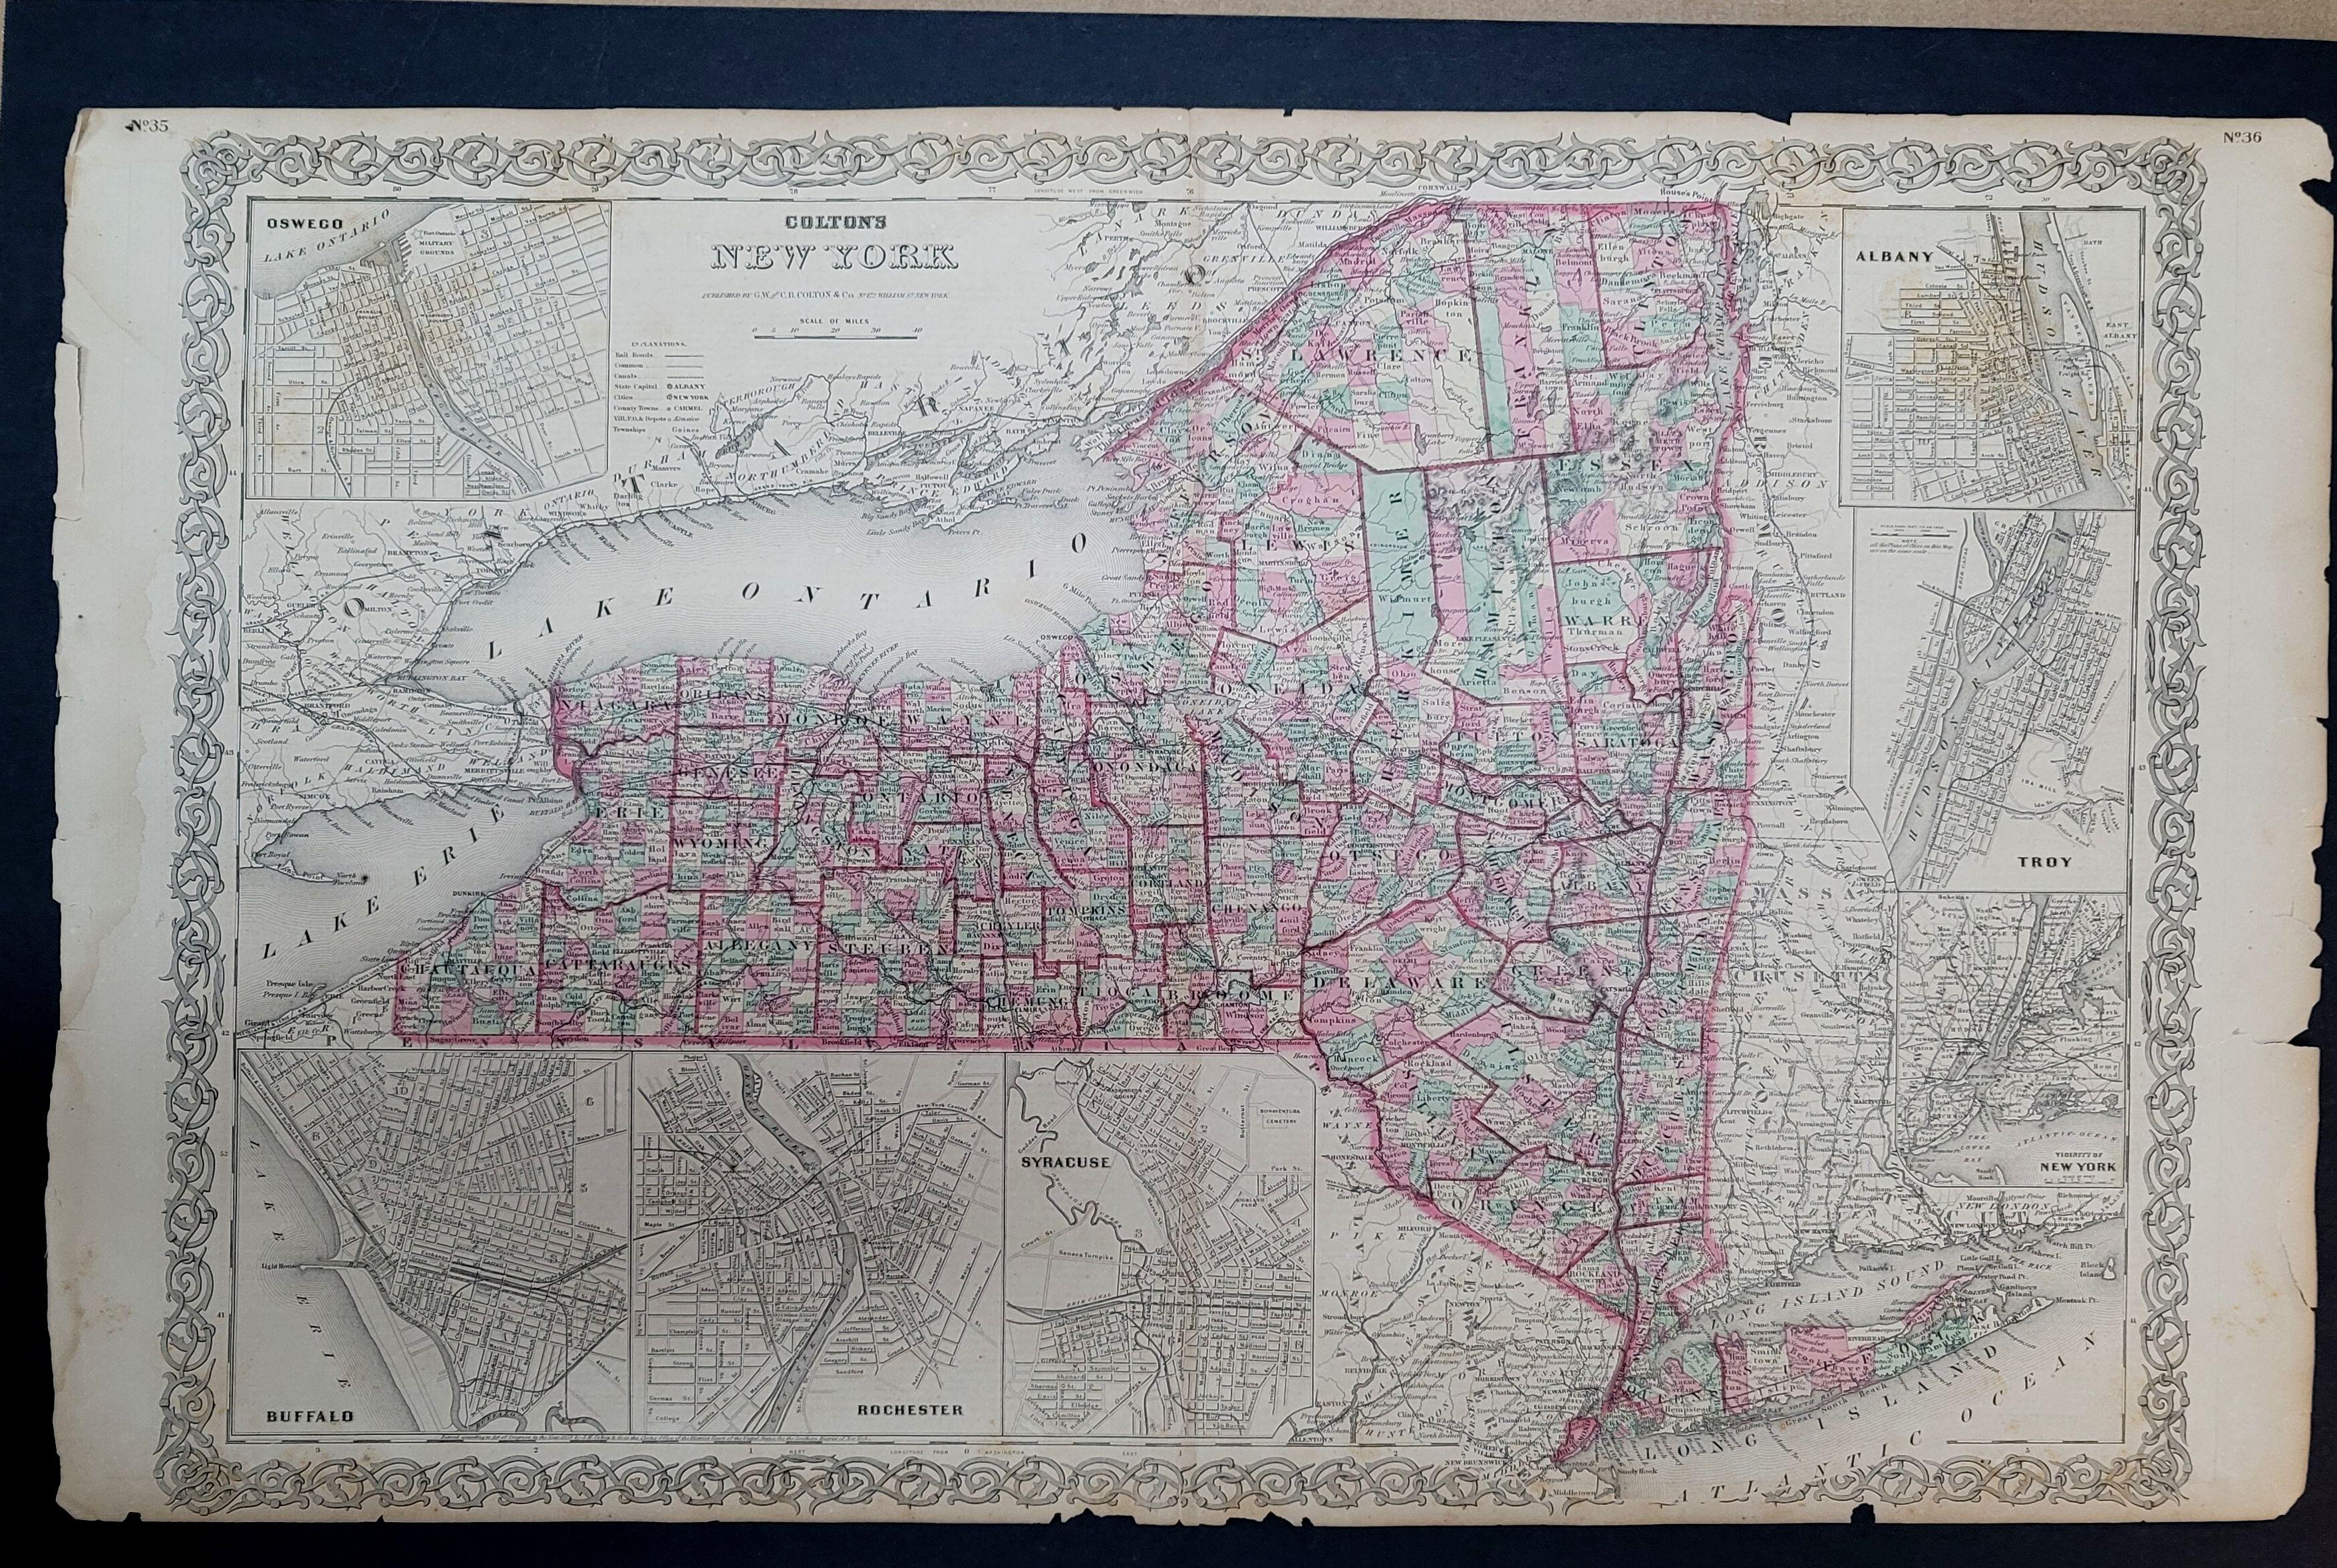 An 1858 Colton's map of New York
Ric.b011

Colton’s New York, 1858 - A large original color engraved and very detailed map of the state of New York, with seven insets: Oswego, Buffalo, Rochester, Syracuse, Albany, Troy and New York City. The main